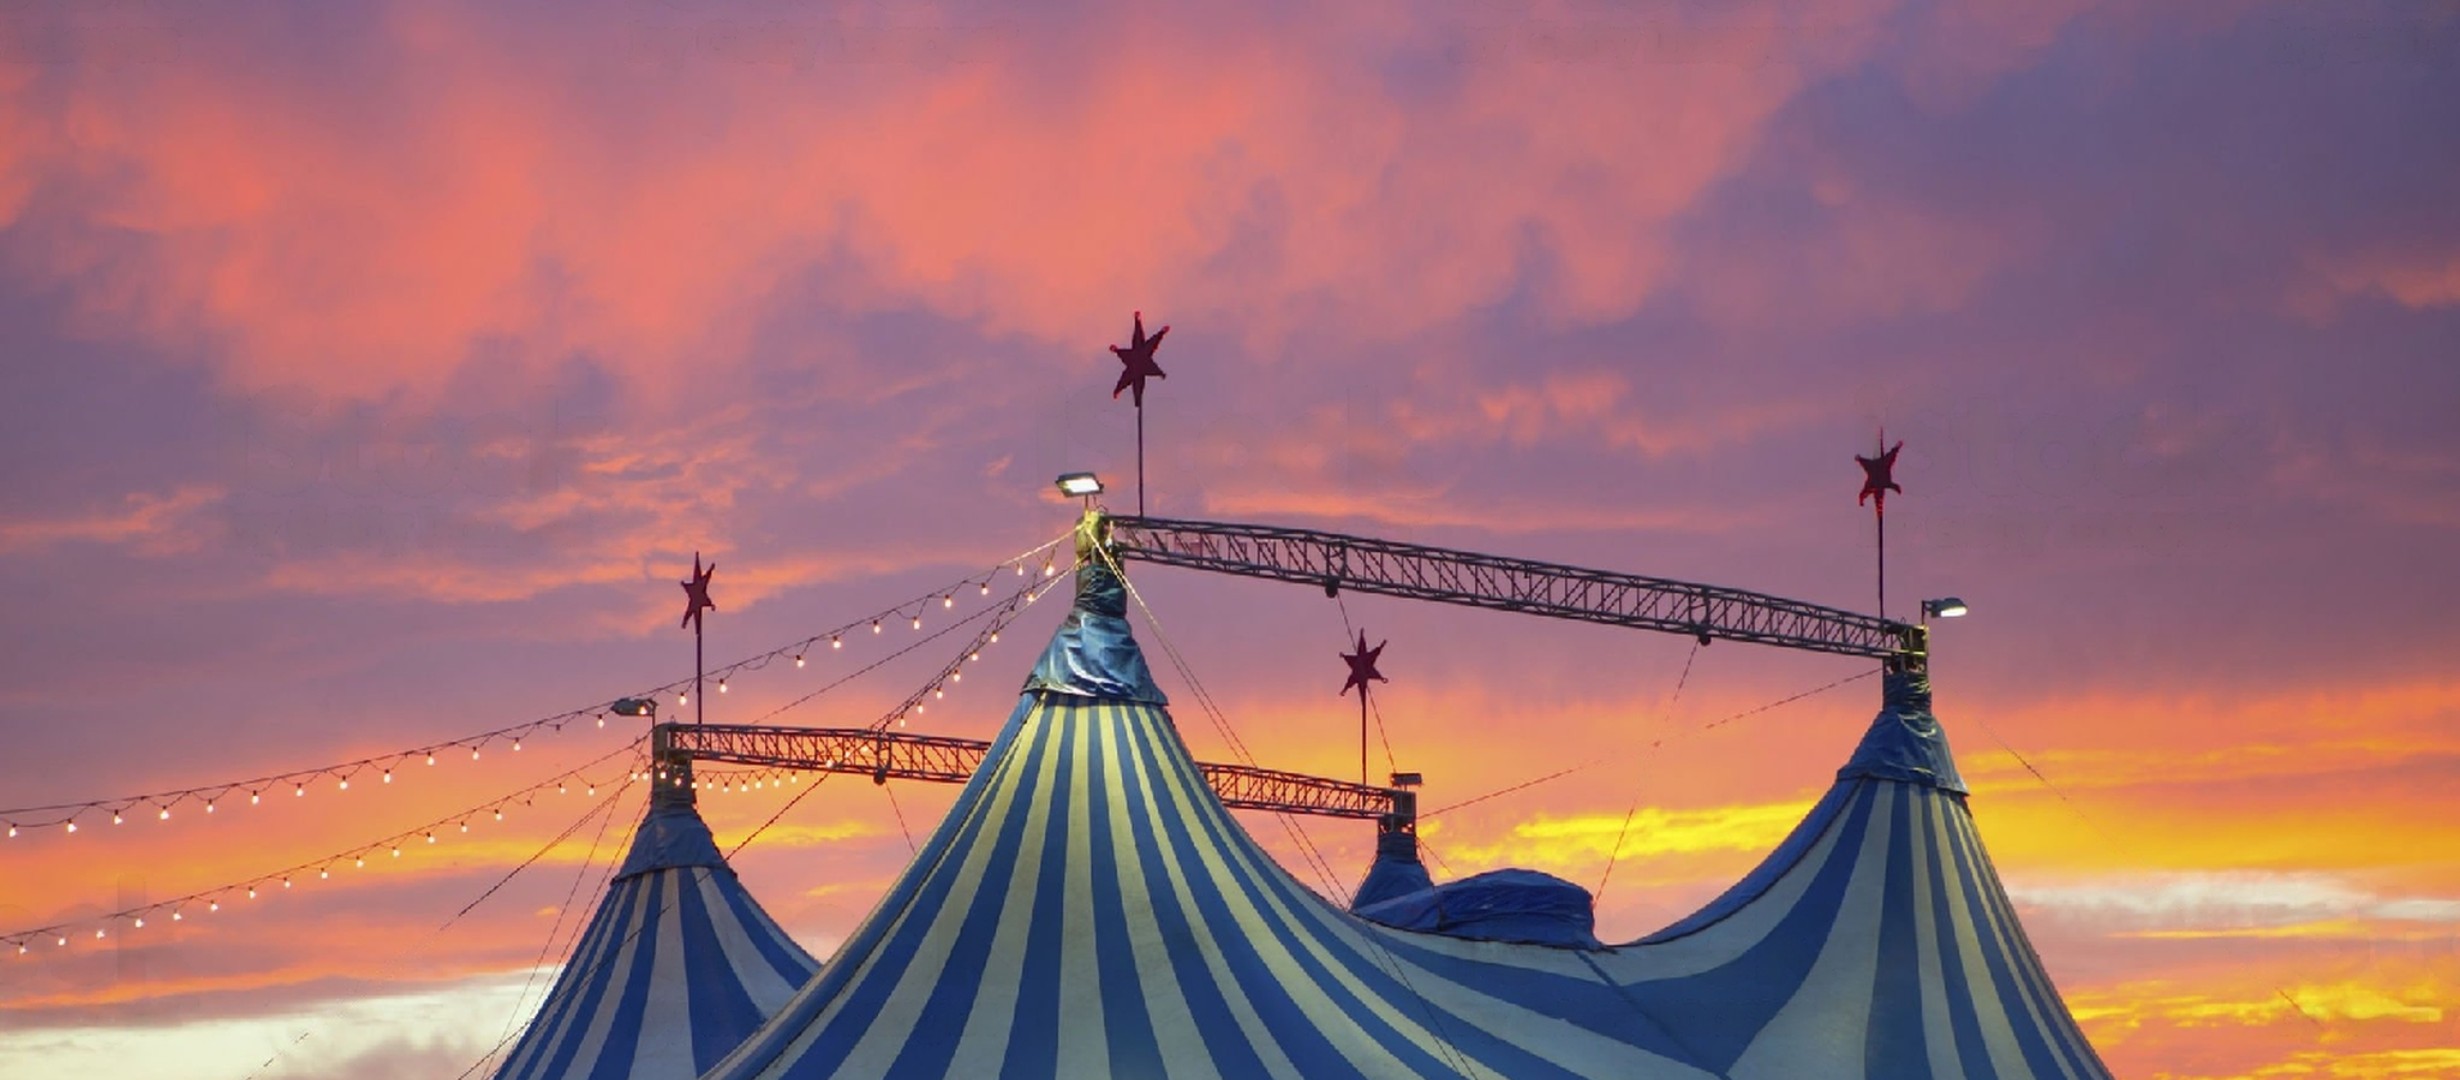 Circus tent in the sunset